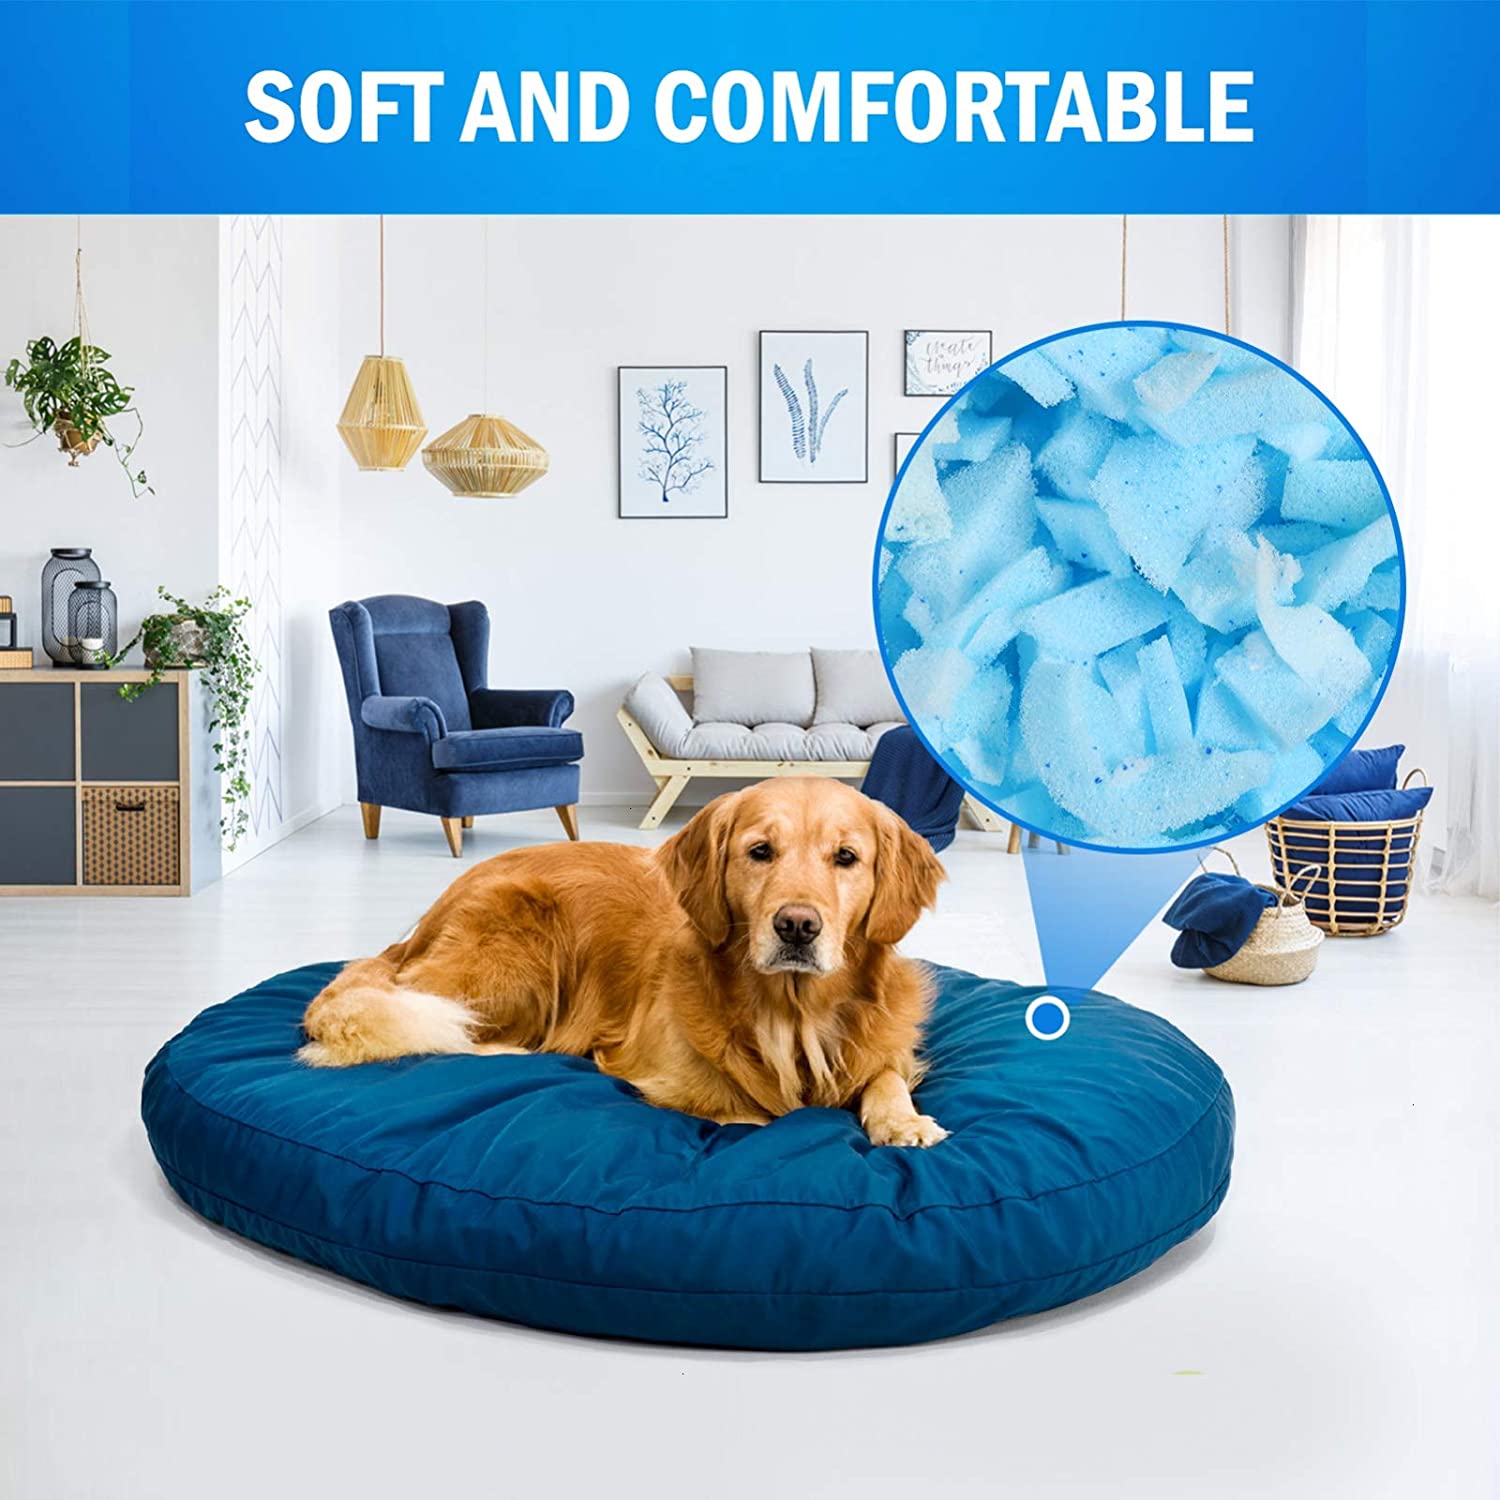  Hem Dgpsy 15lbs Shredded Gel Memory Foam Filling for Bean Bag  Chair, Memory Foam Stuffing for Cooling Pillow, Couch, Pouf Beanbag Chair,  Dog Bed, Cushion, Art Crafts : Home & Kitchen